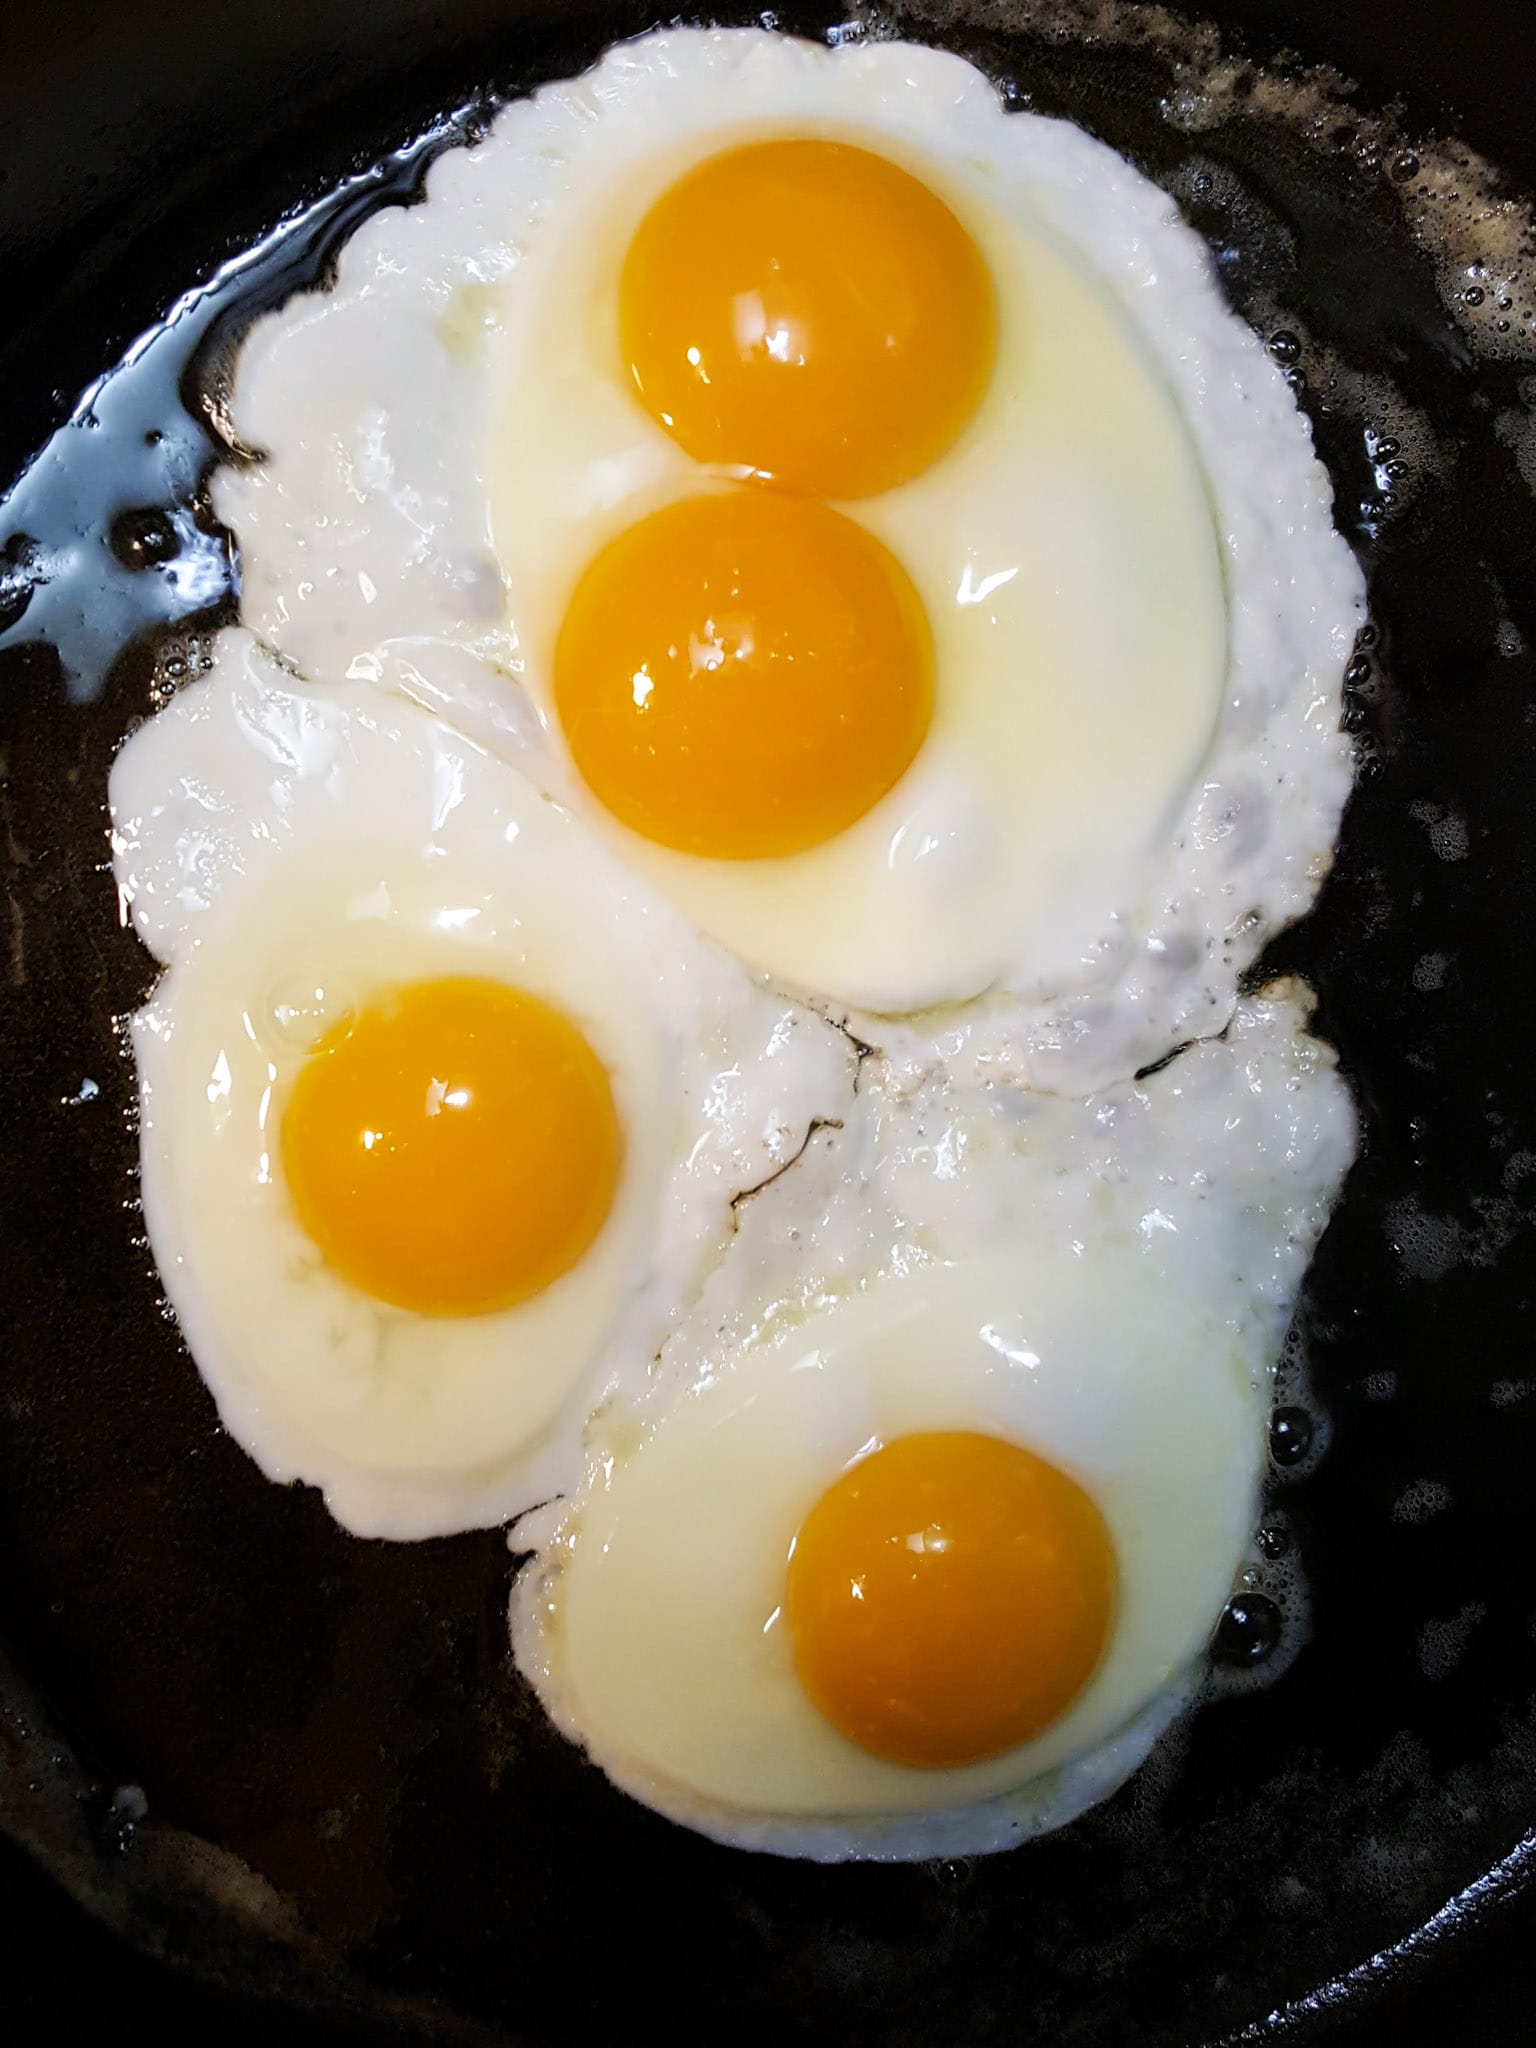 Four sunny side up or over easy eggs are being cooked in a cast iron skillet. The oil and edges of the eggs are visibly bubbling while the yolks and inner whites are not yet fully cooked. 